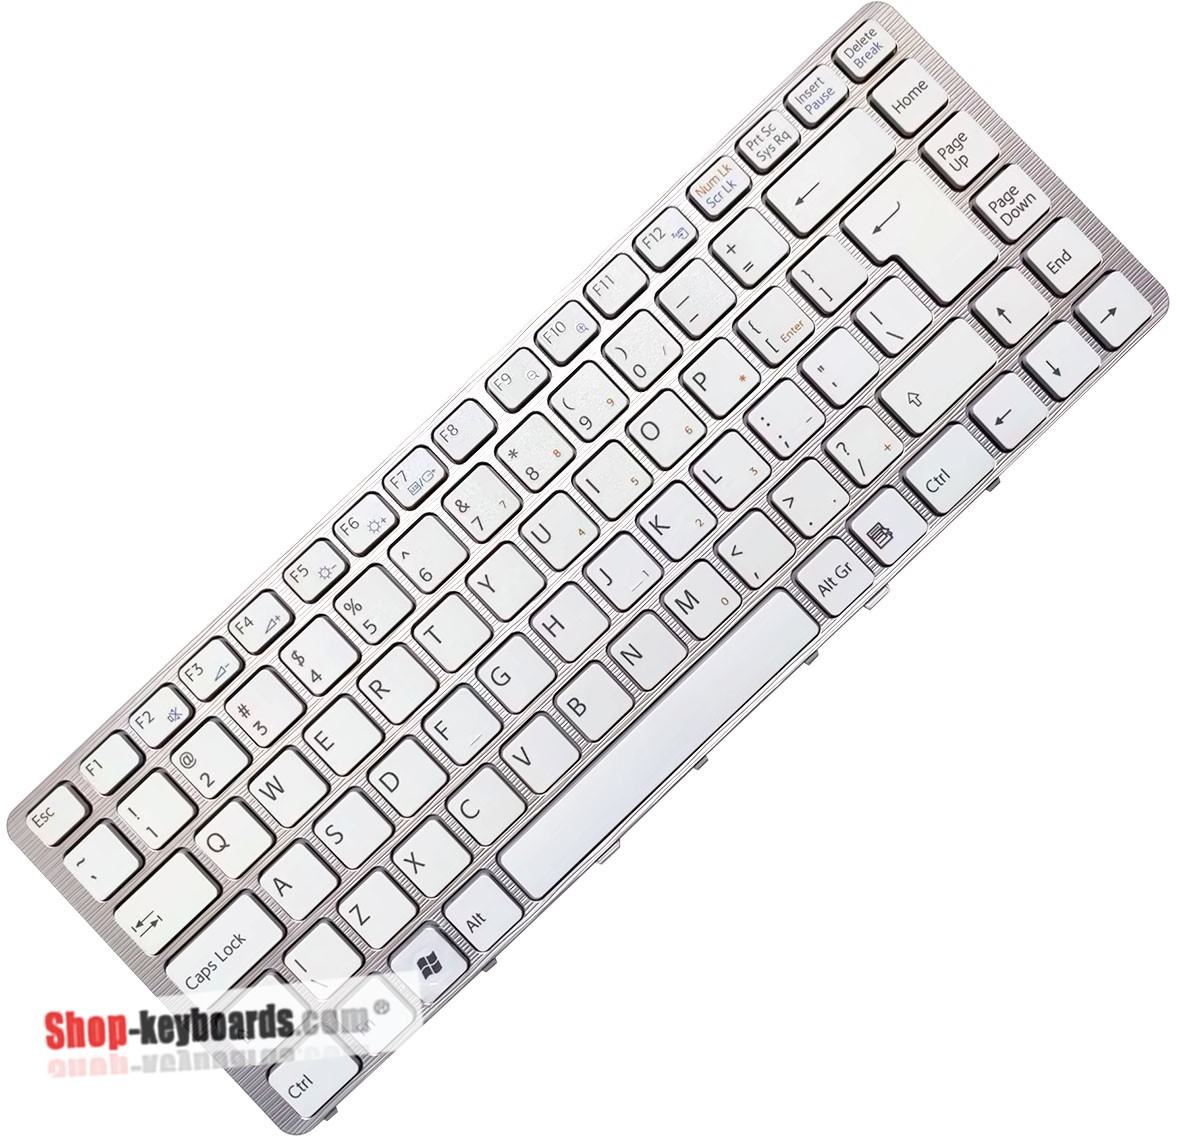 Sony VAIO VGN-NW21JF  Keyboard replacement